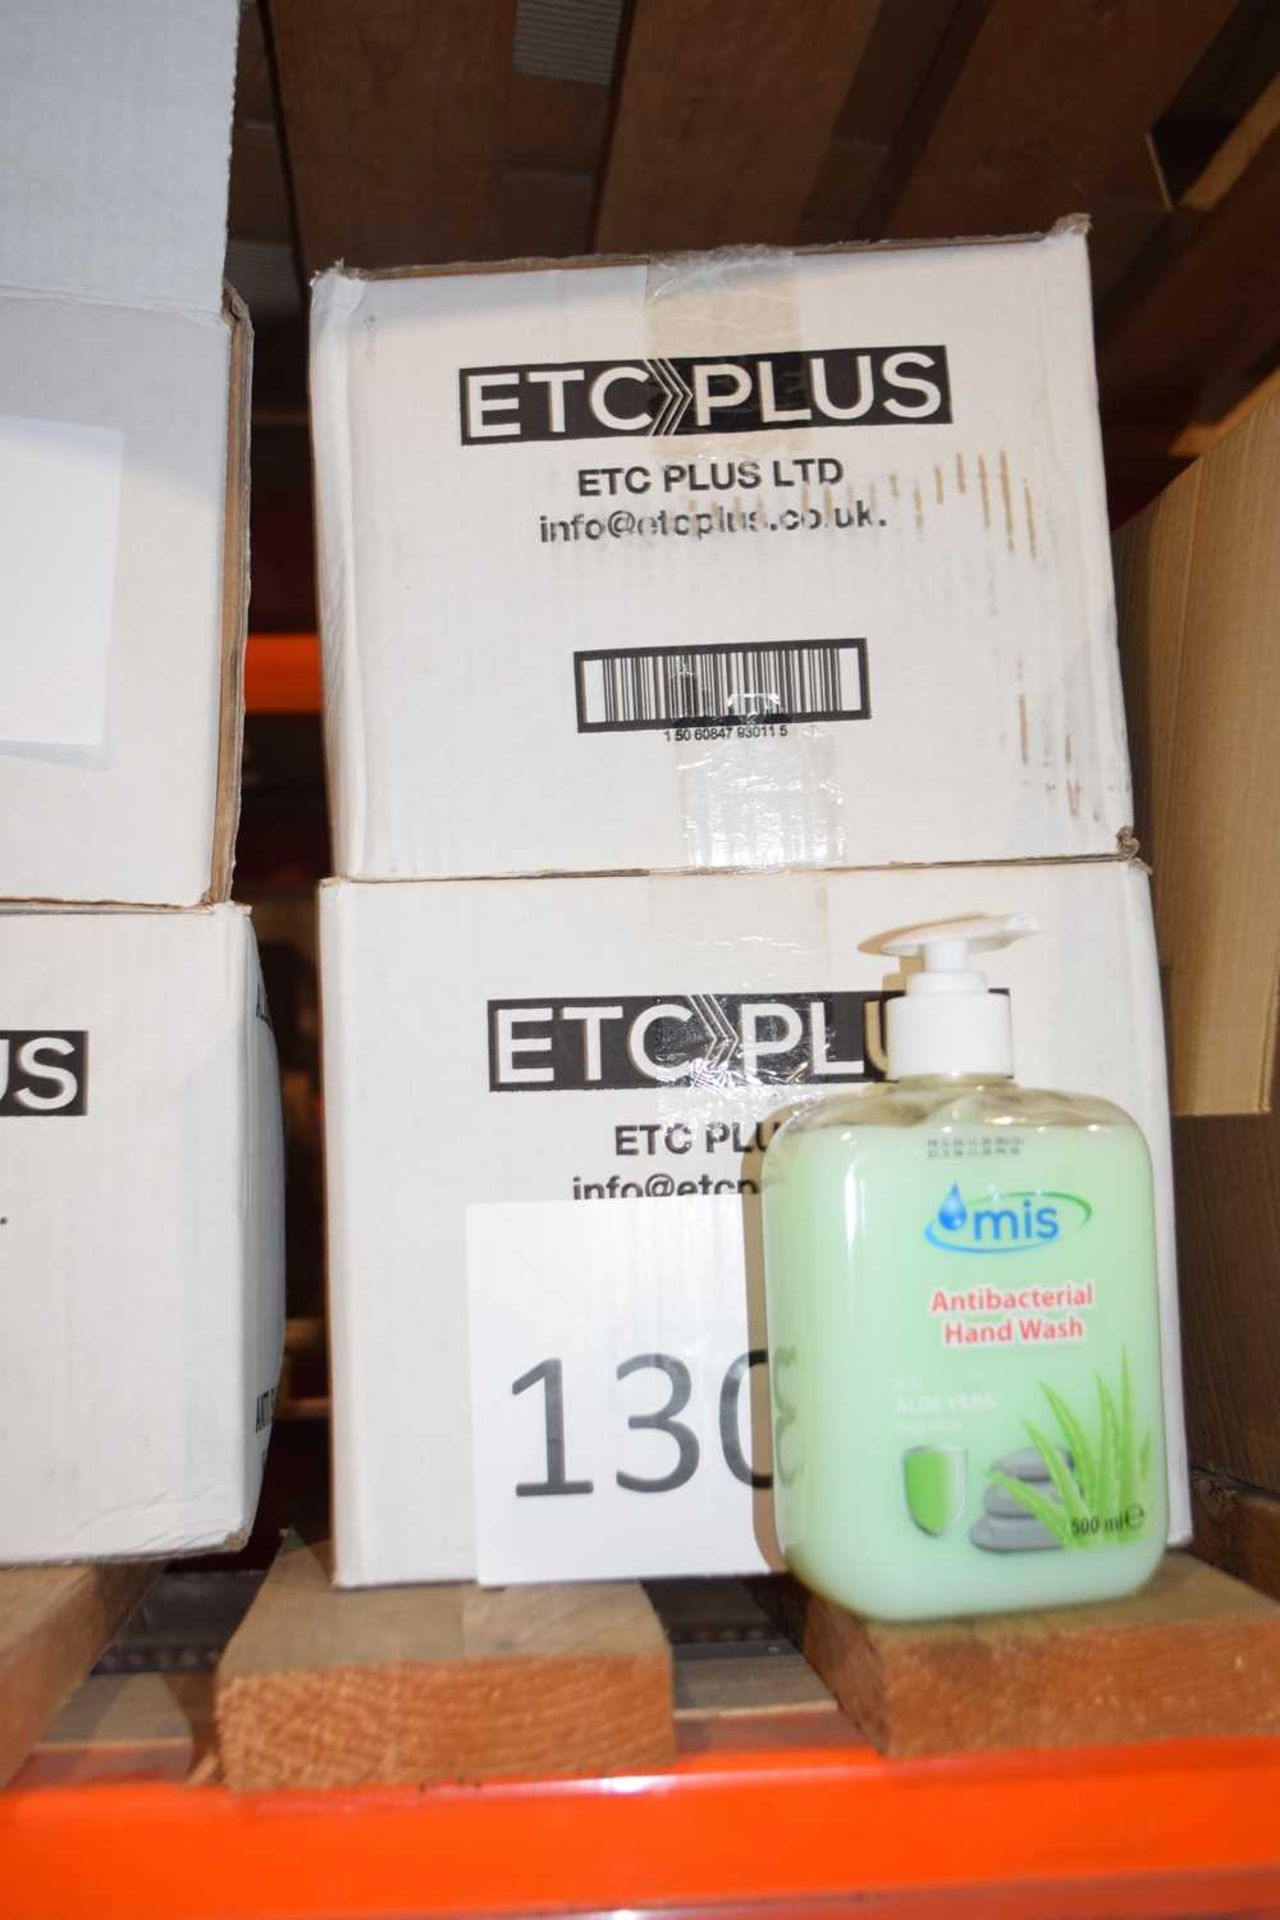 Four boxes of Anti-Bacterial Hand Wash, each box containing 12 500ml bottles